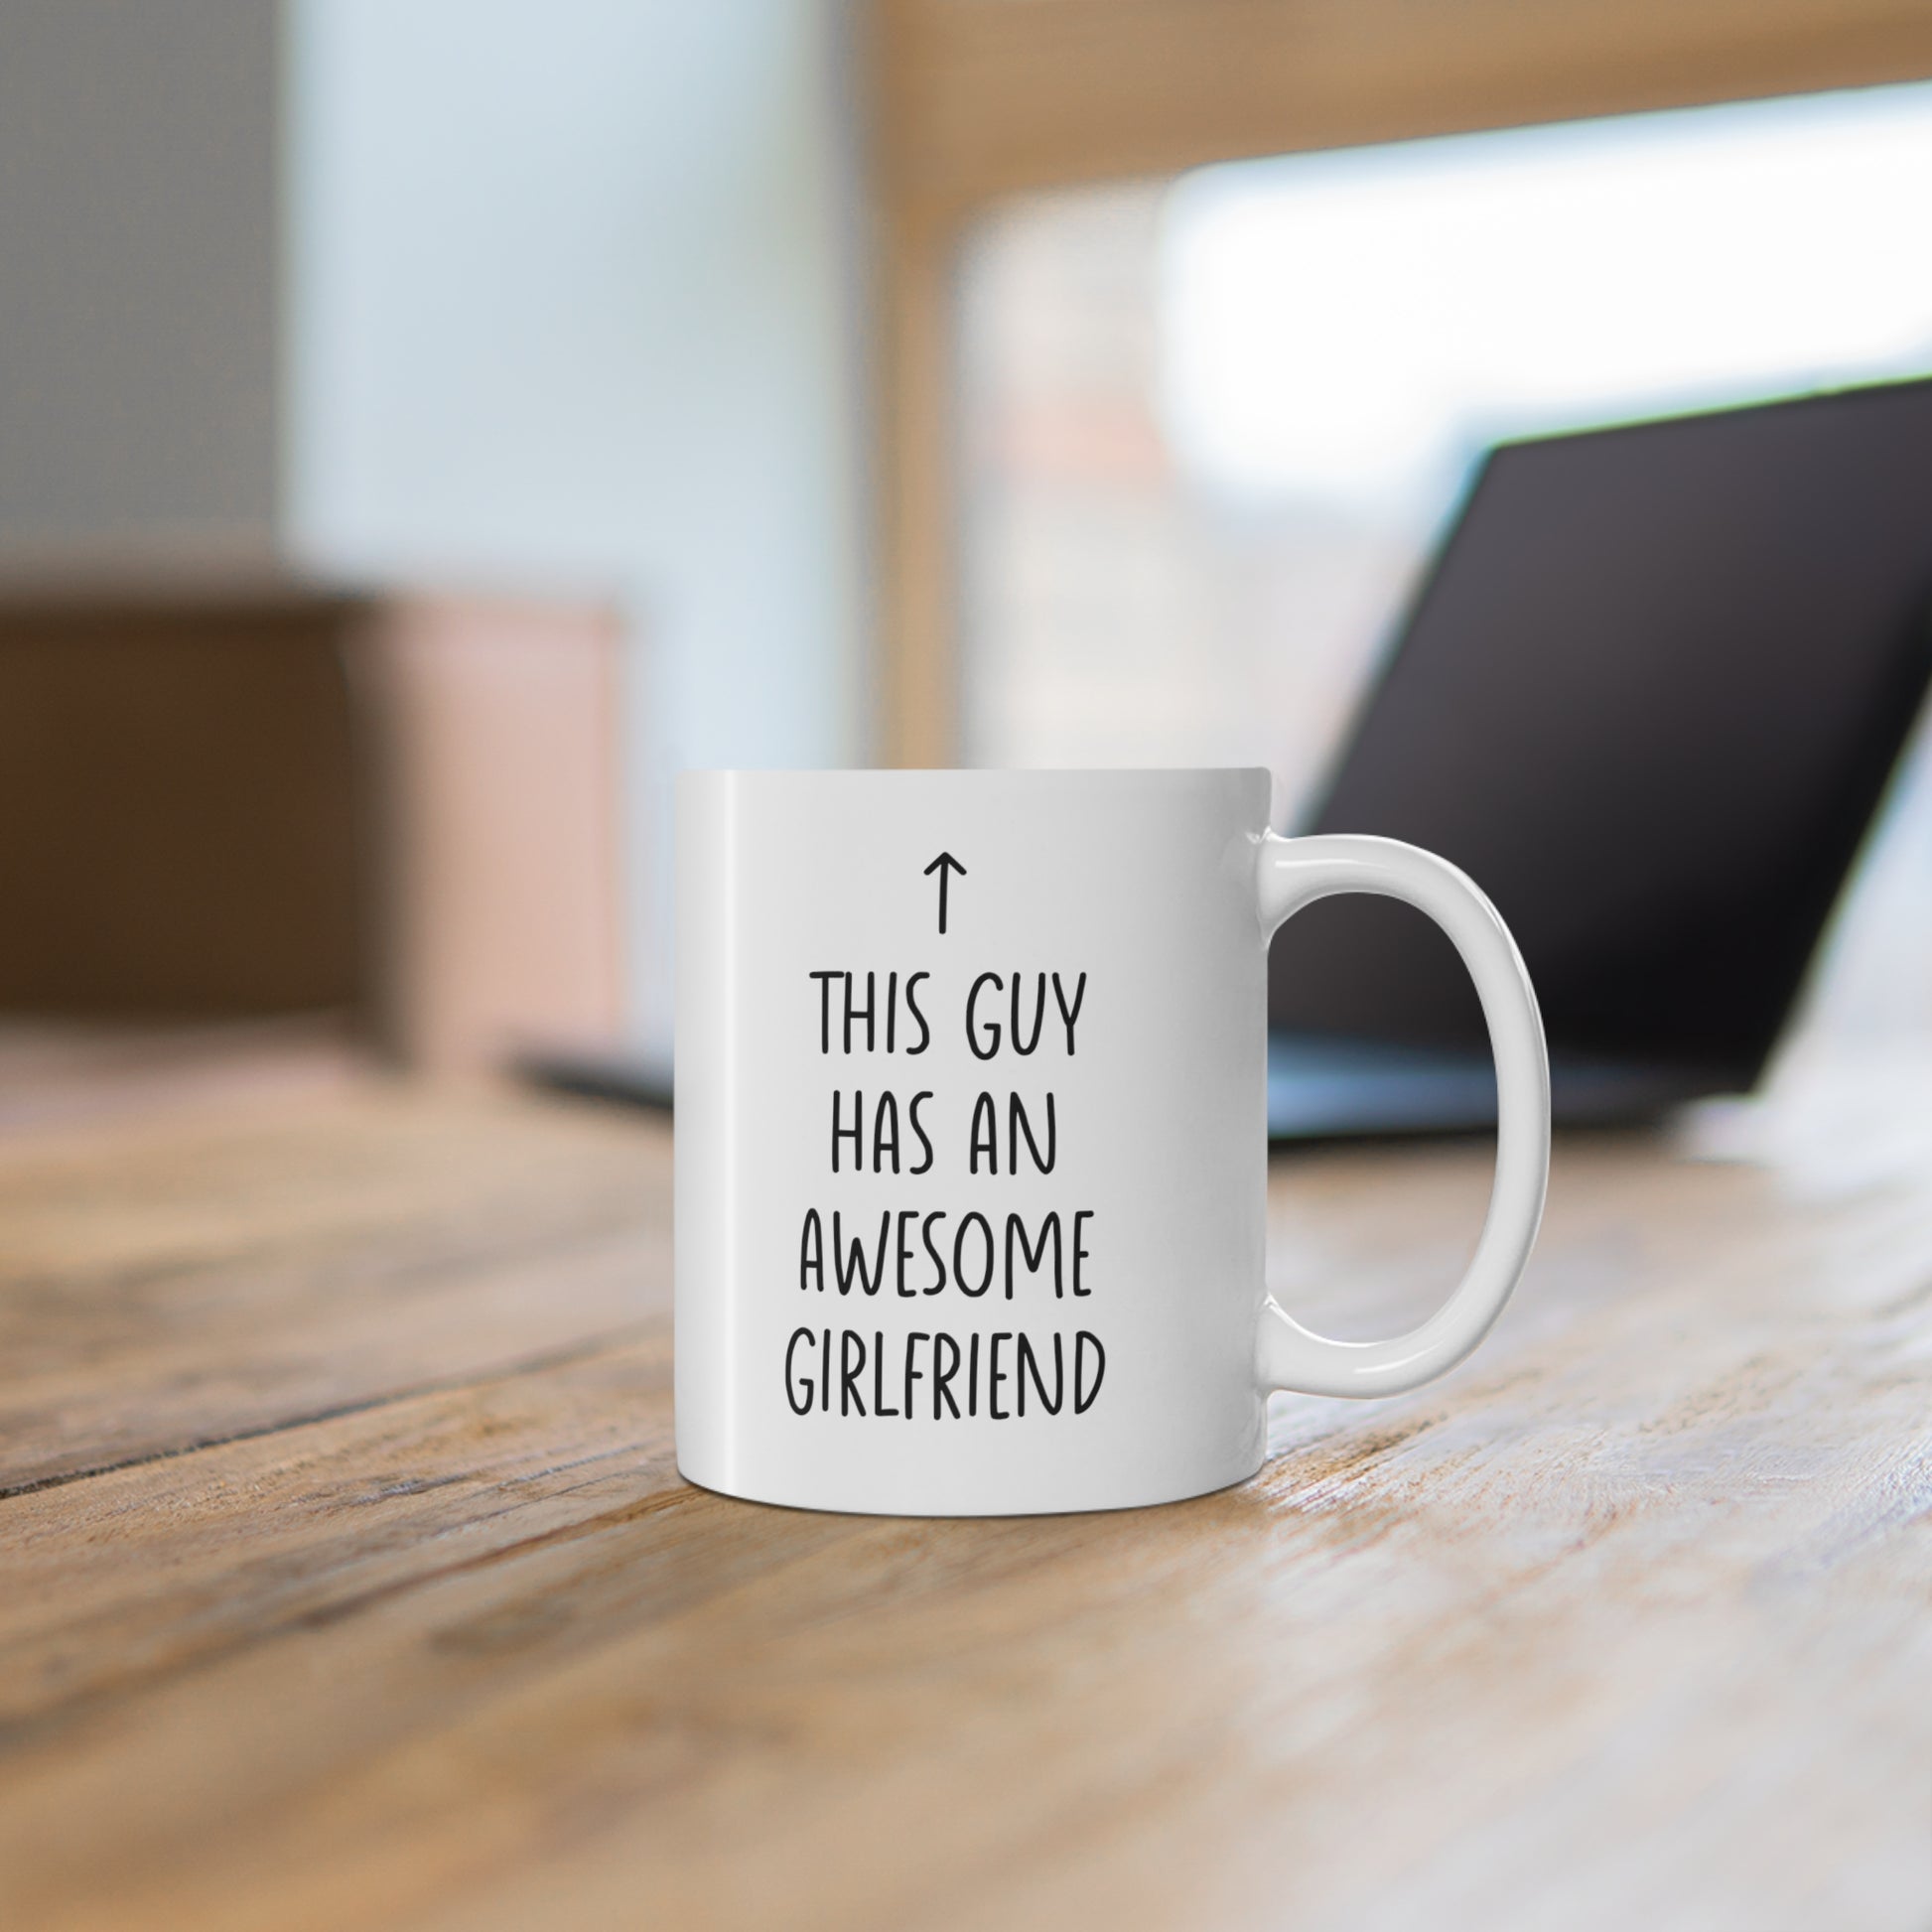 11oz ceramic mug with quote This Guy Has An Awesome Girlfriend